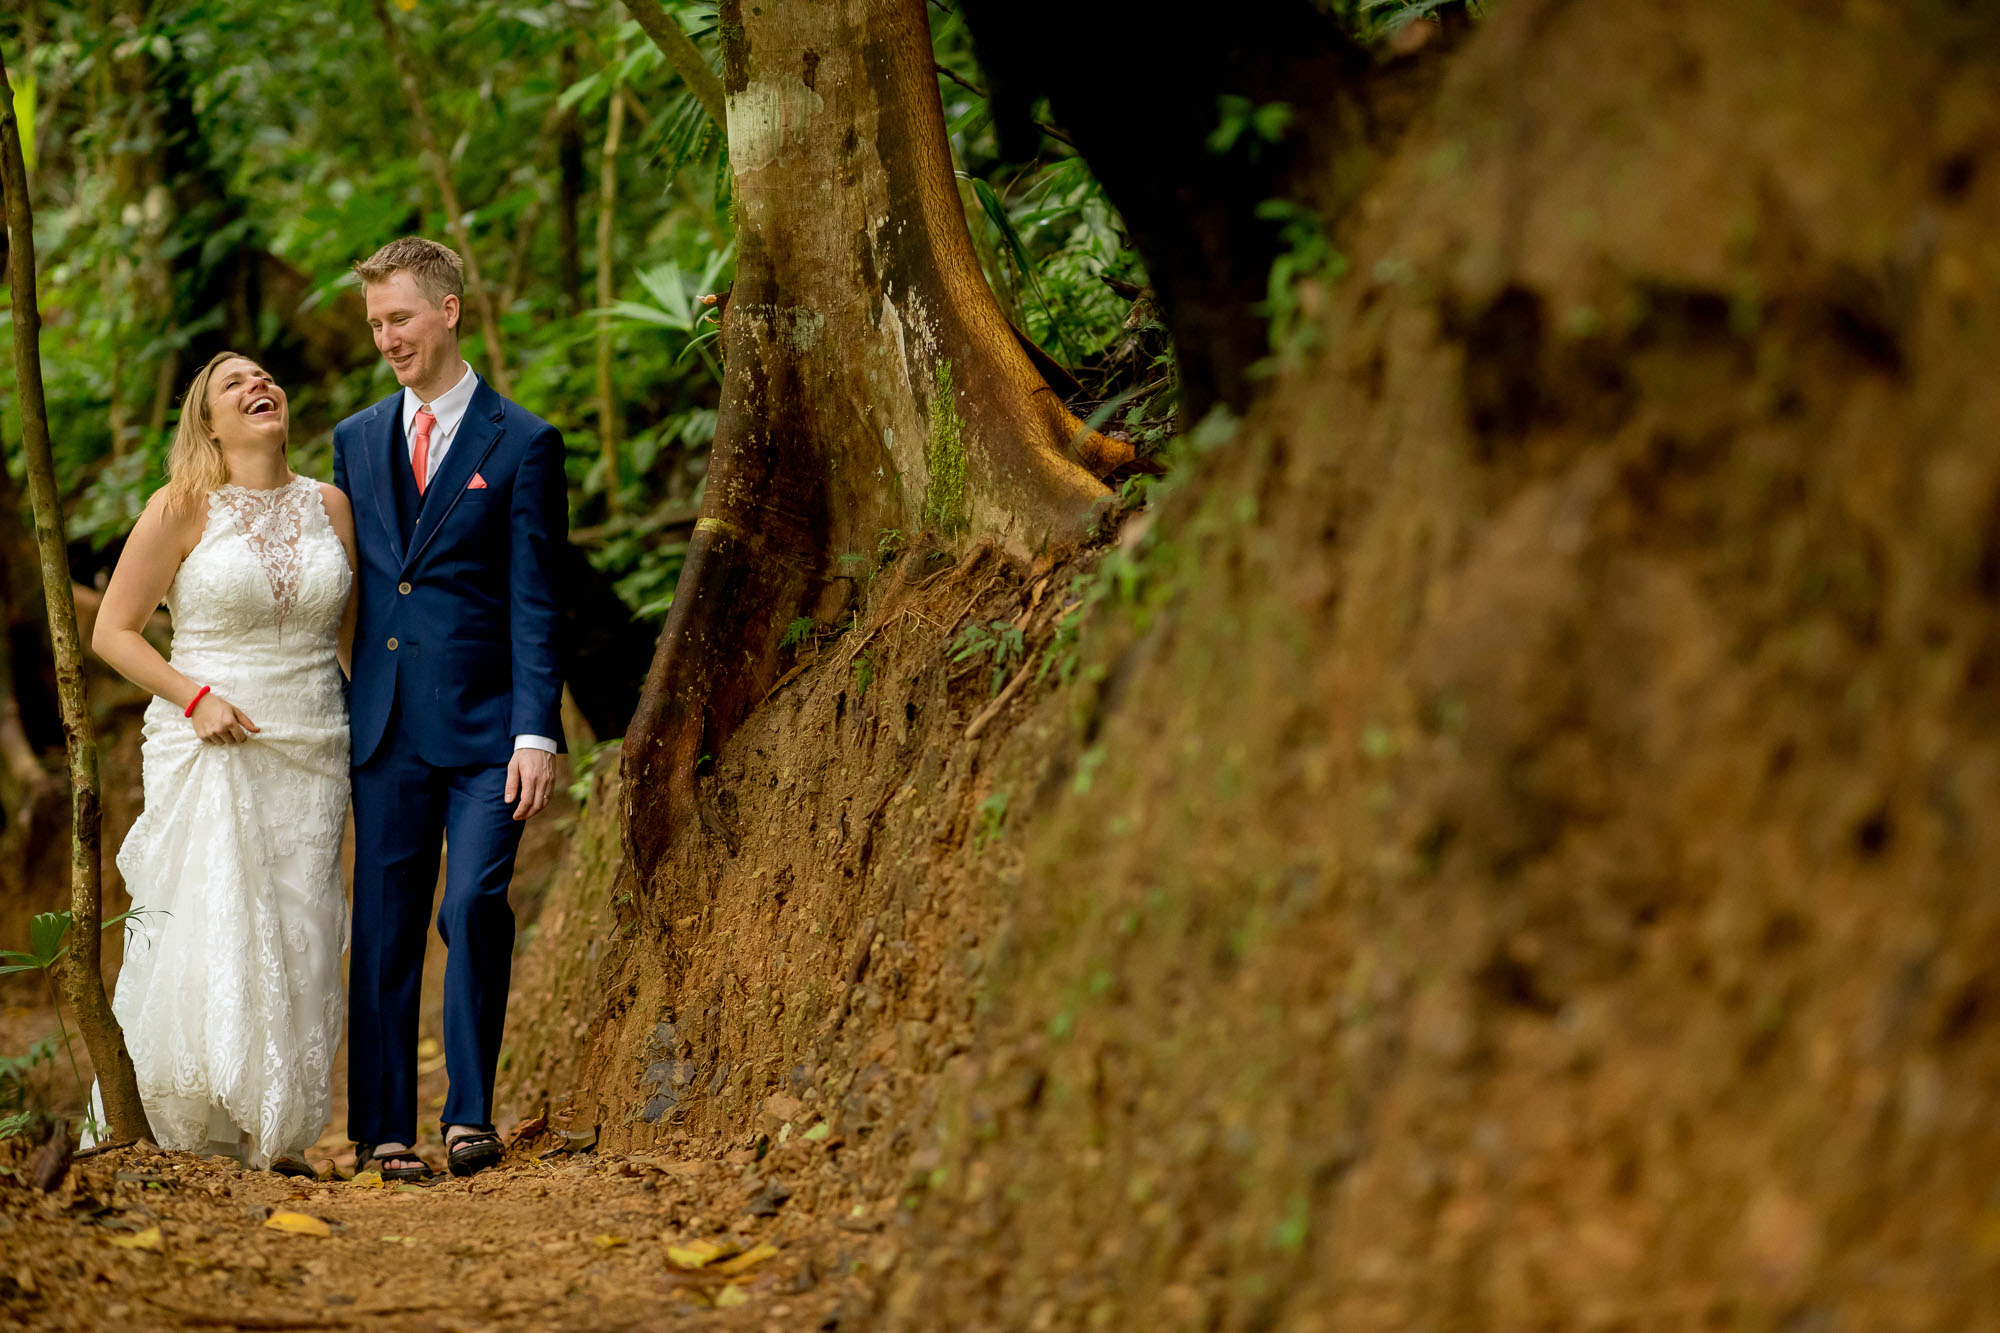 Tromping to the waterfall in their wedding finery